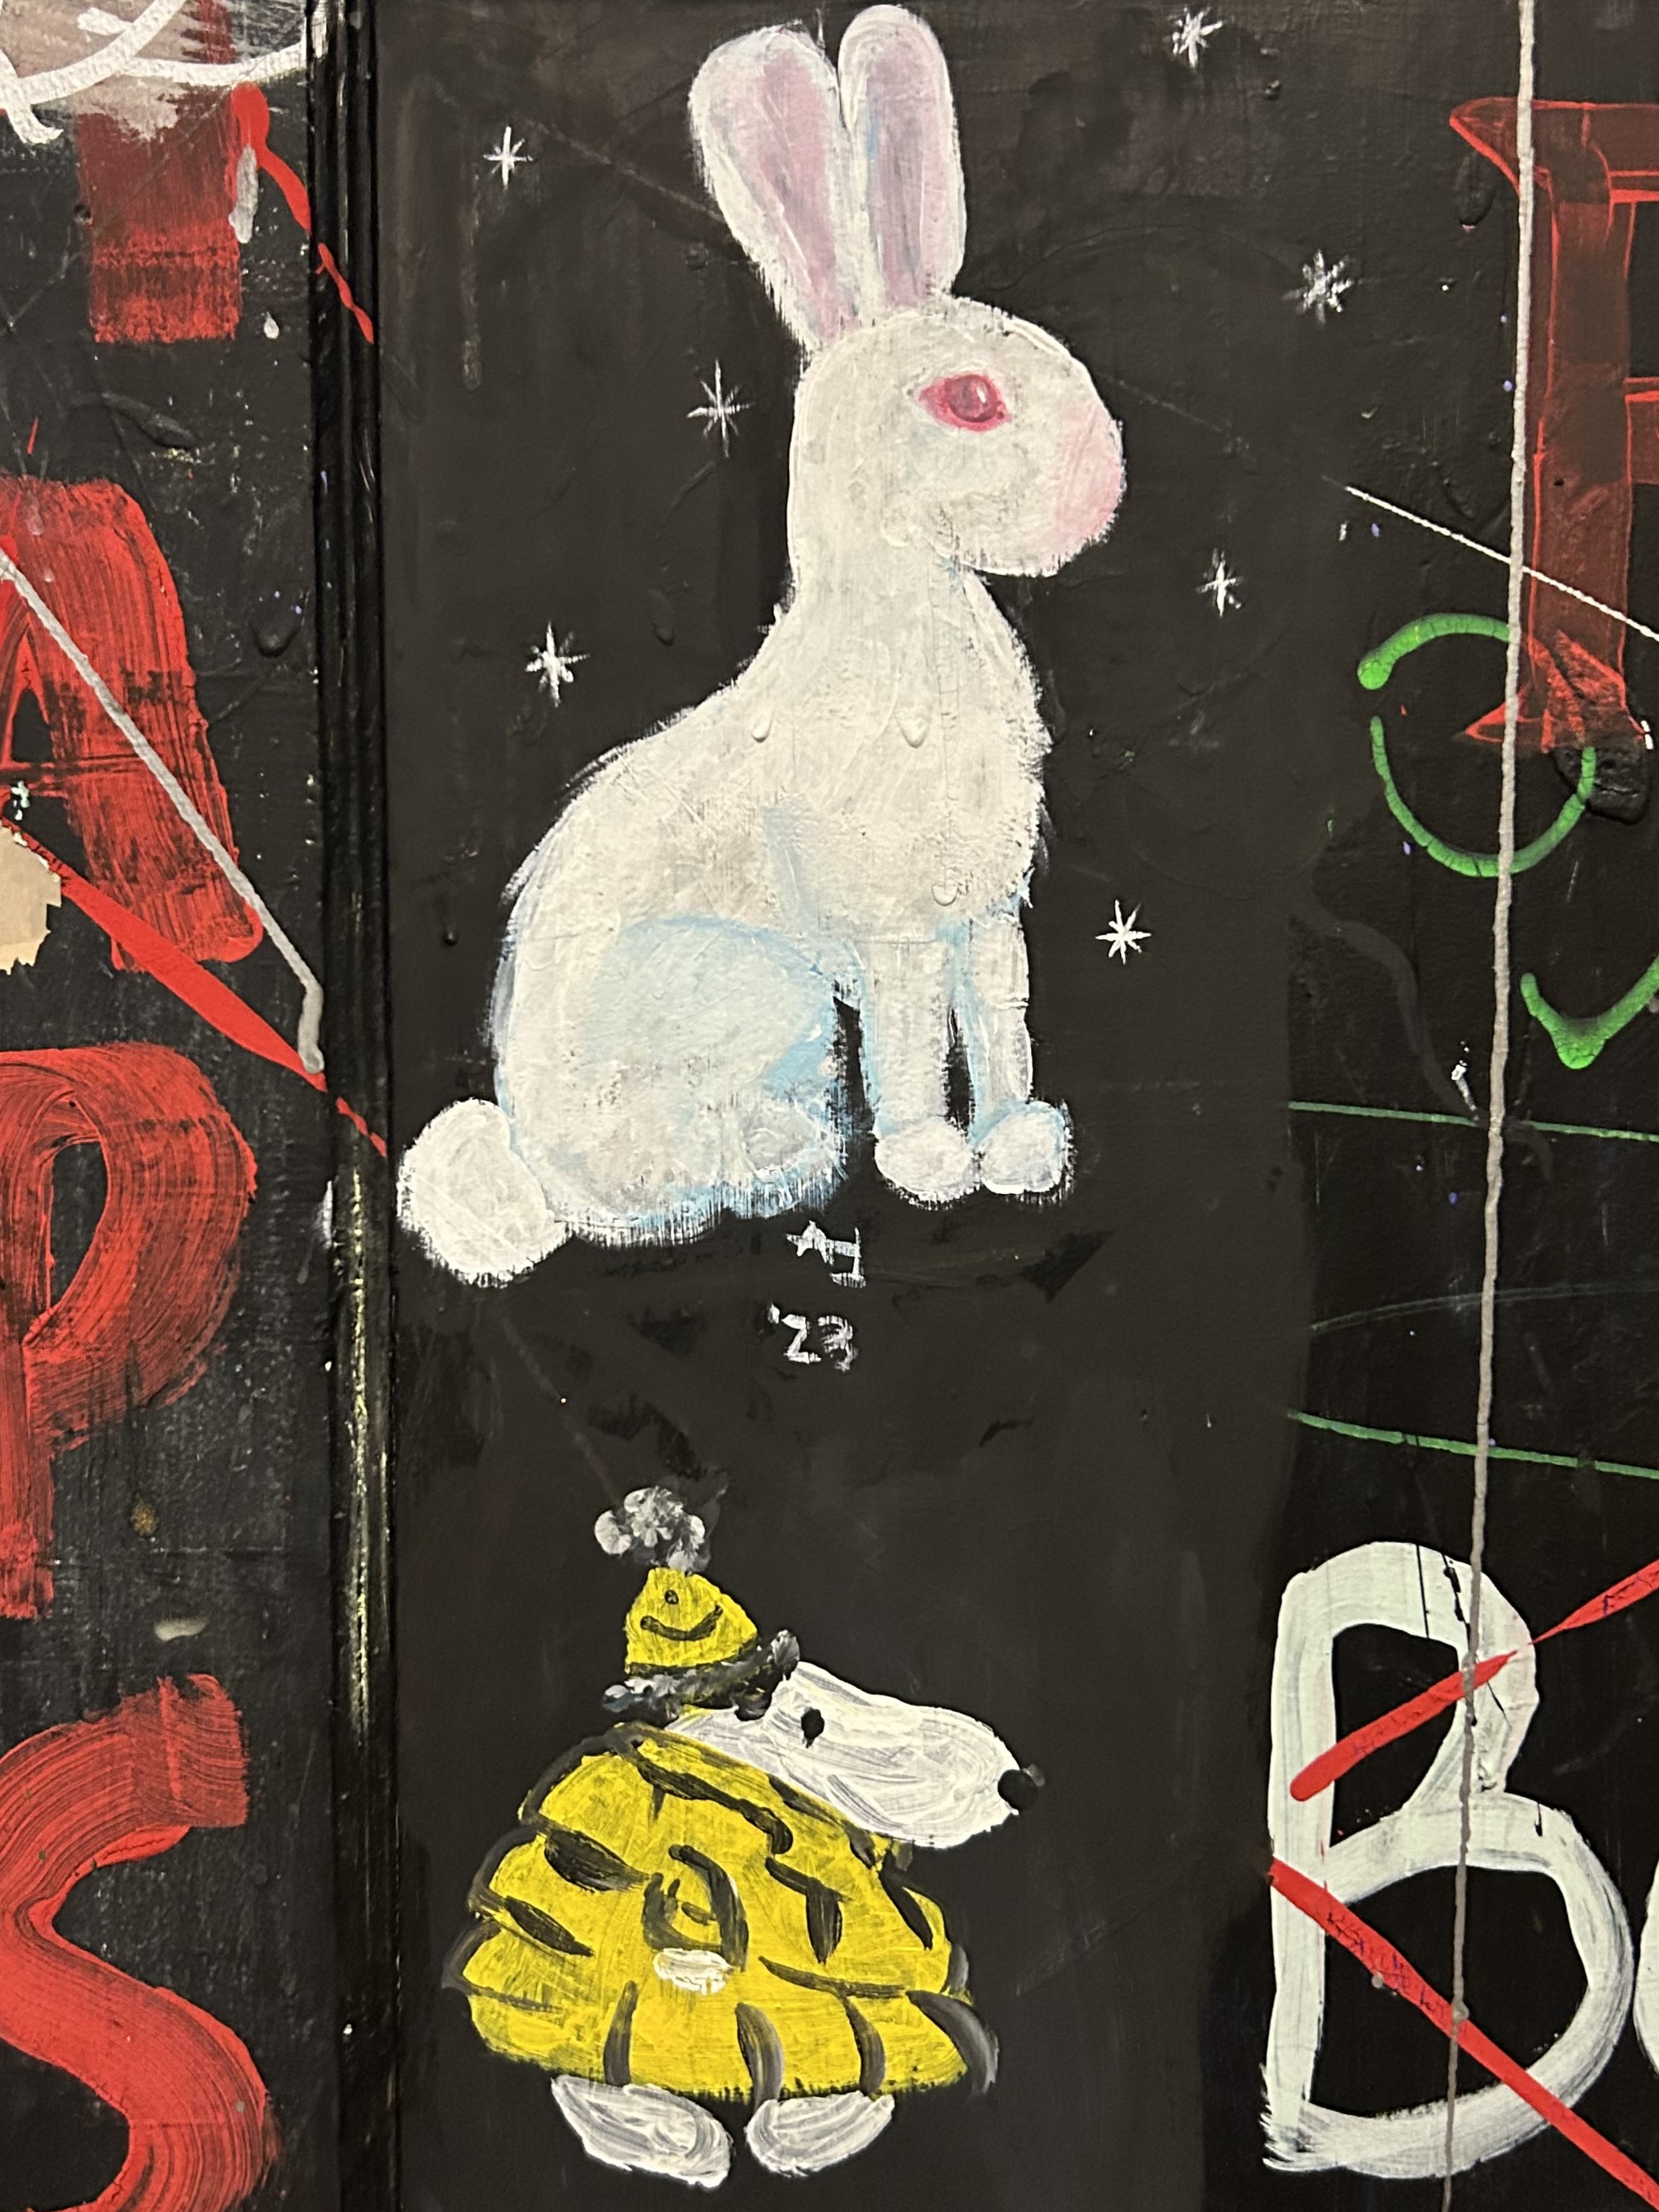 graffiti of white rabbbit and snoopy in a yellow puffer jacket